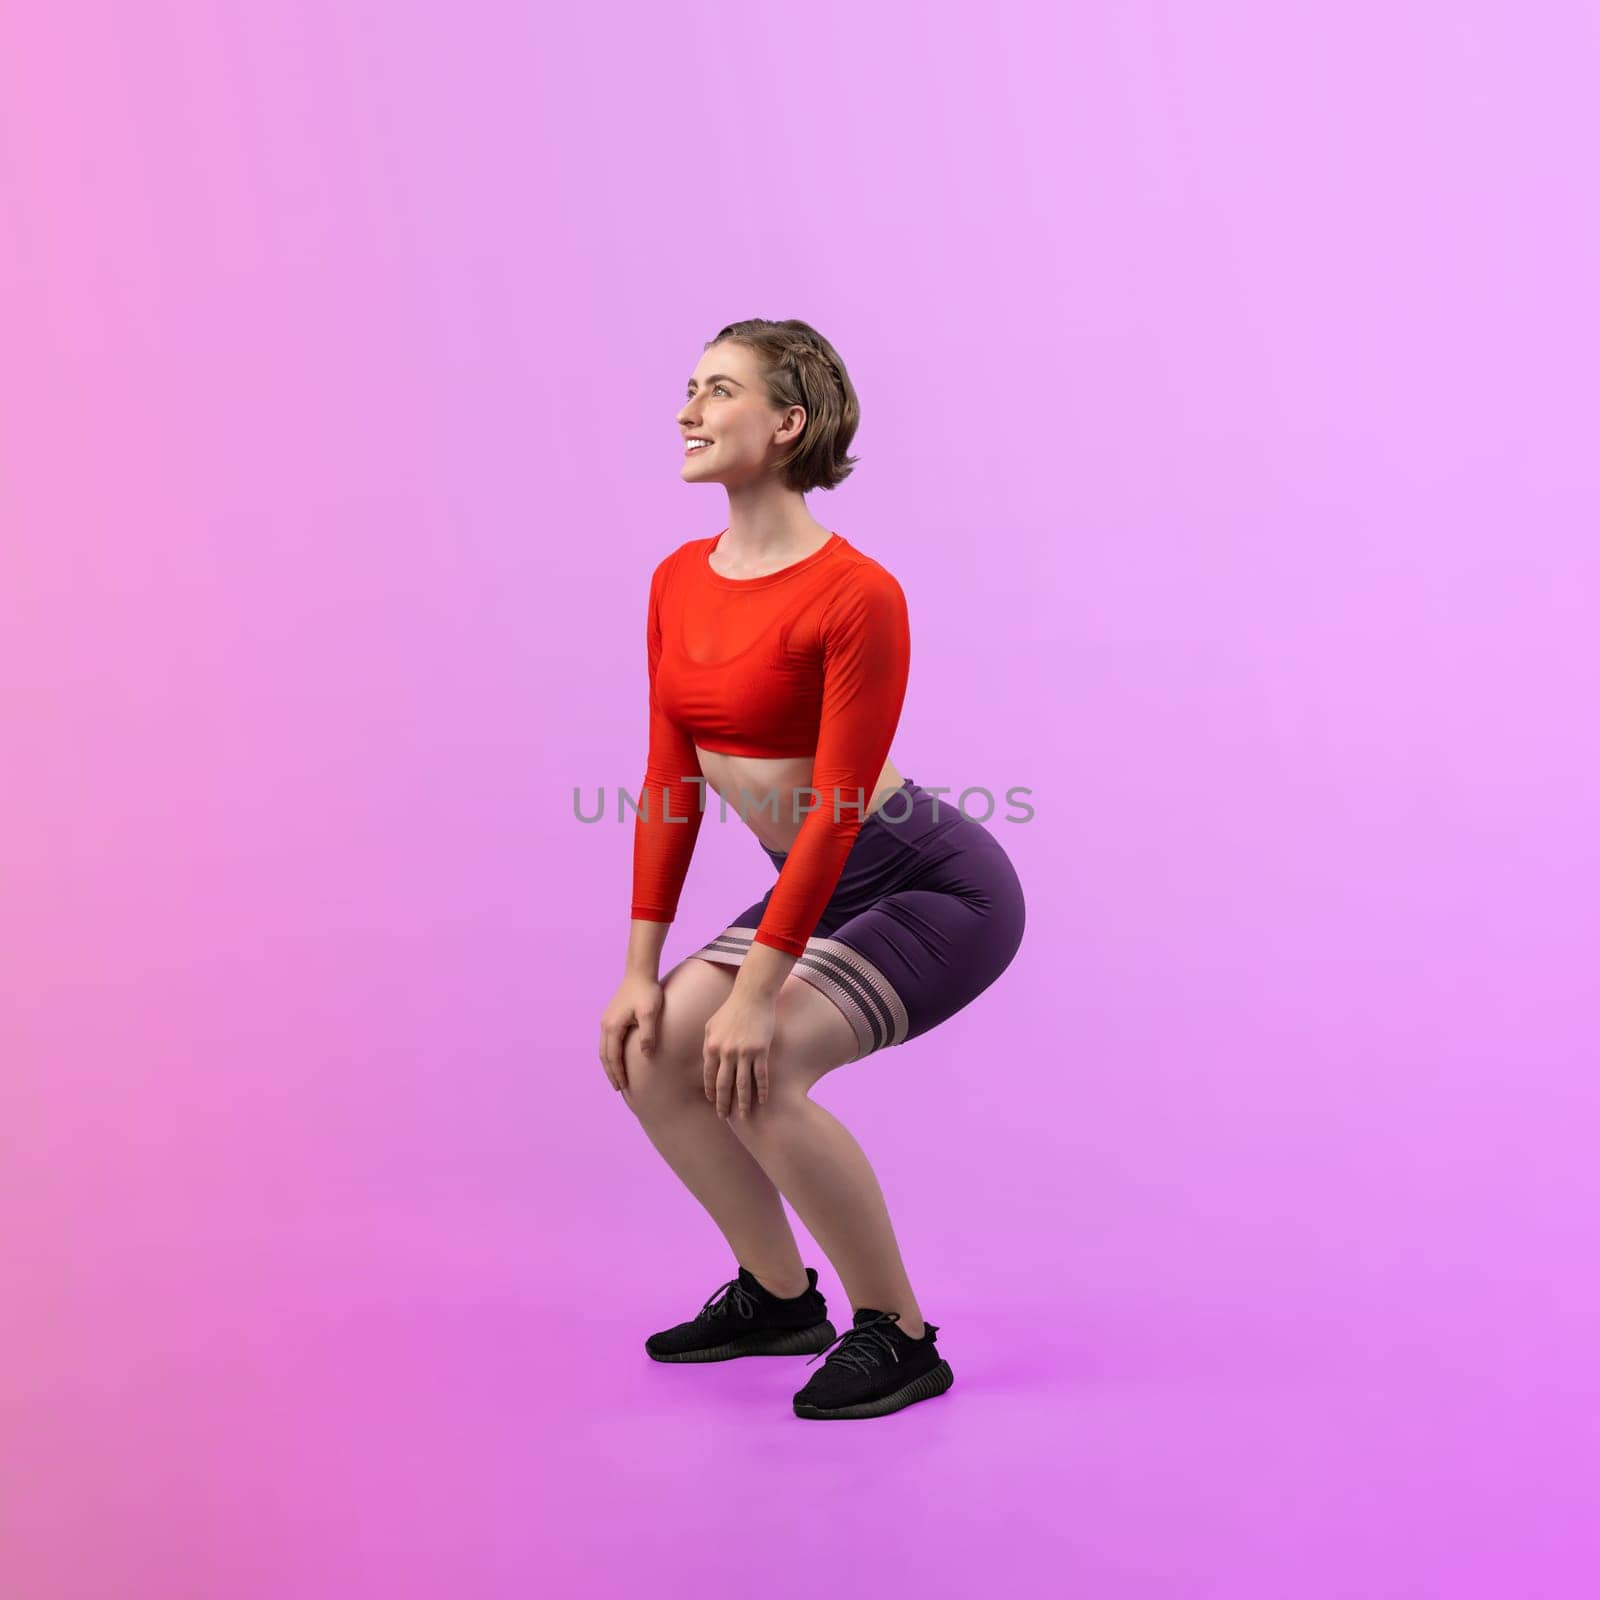 Full body length gaiety shot athletic sporty woman with kicking position posture by biancoblue